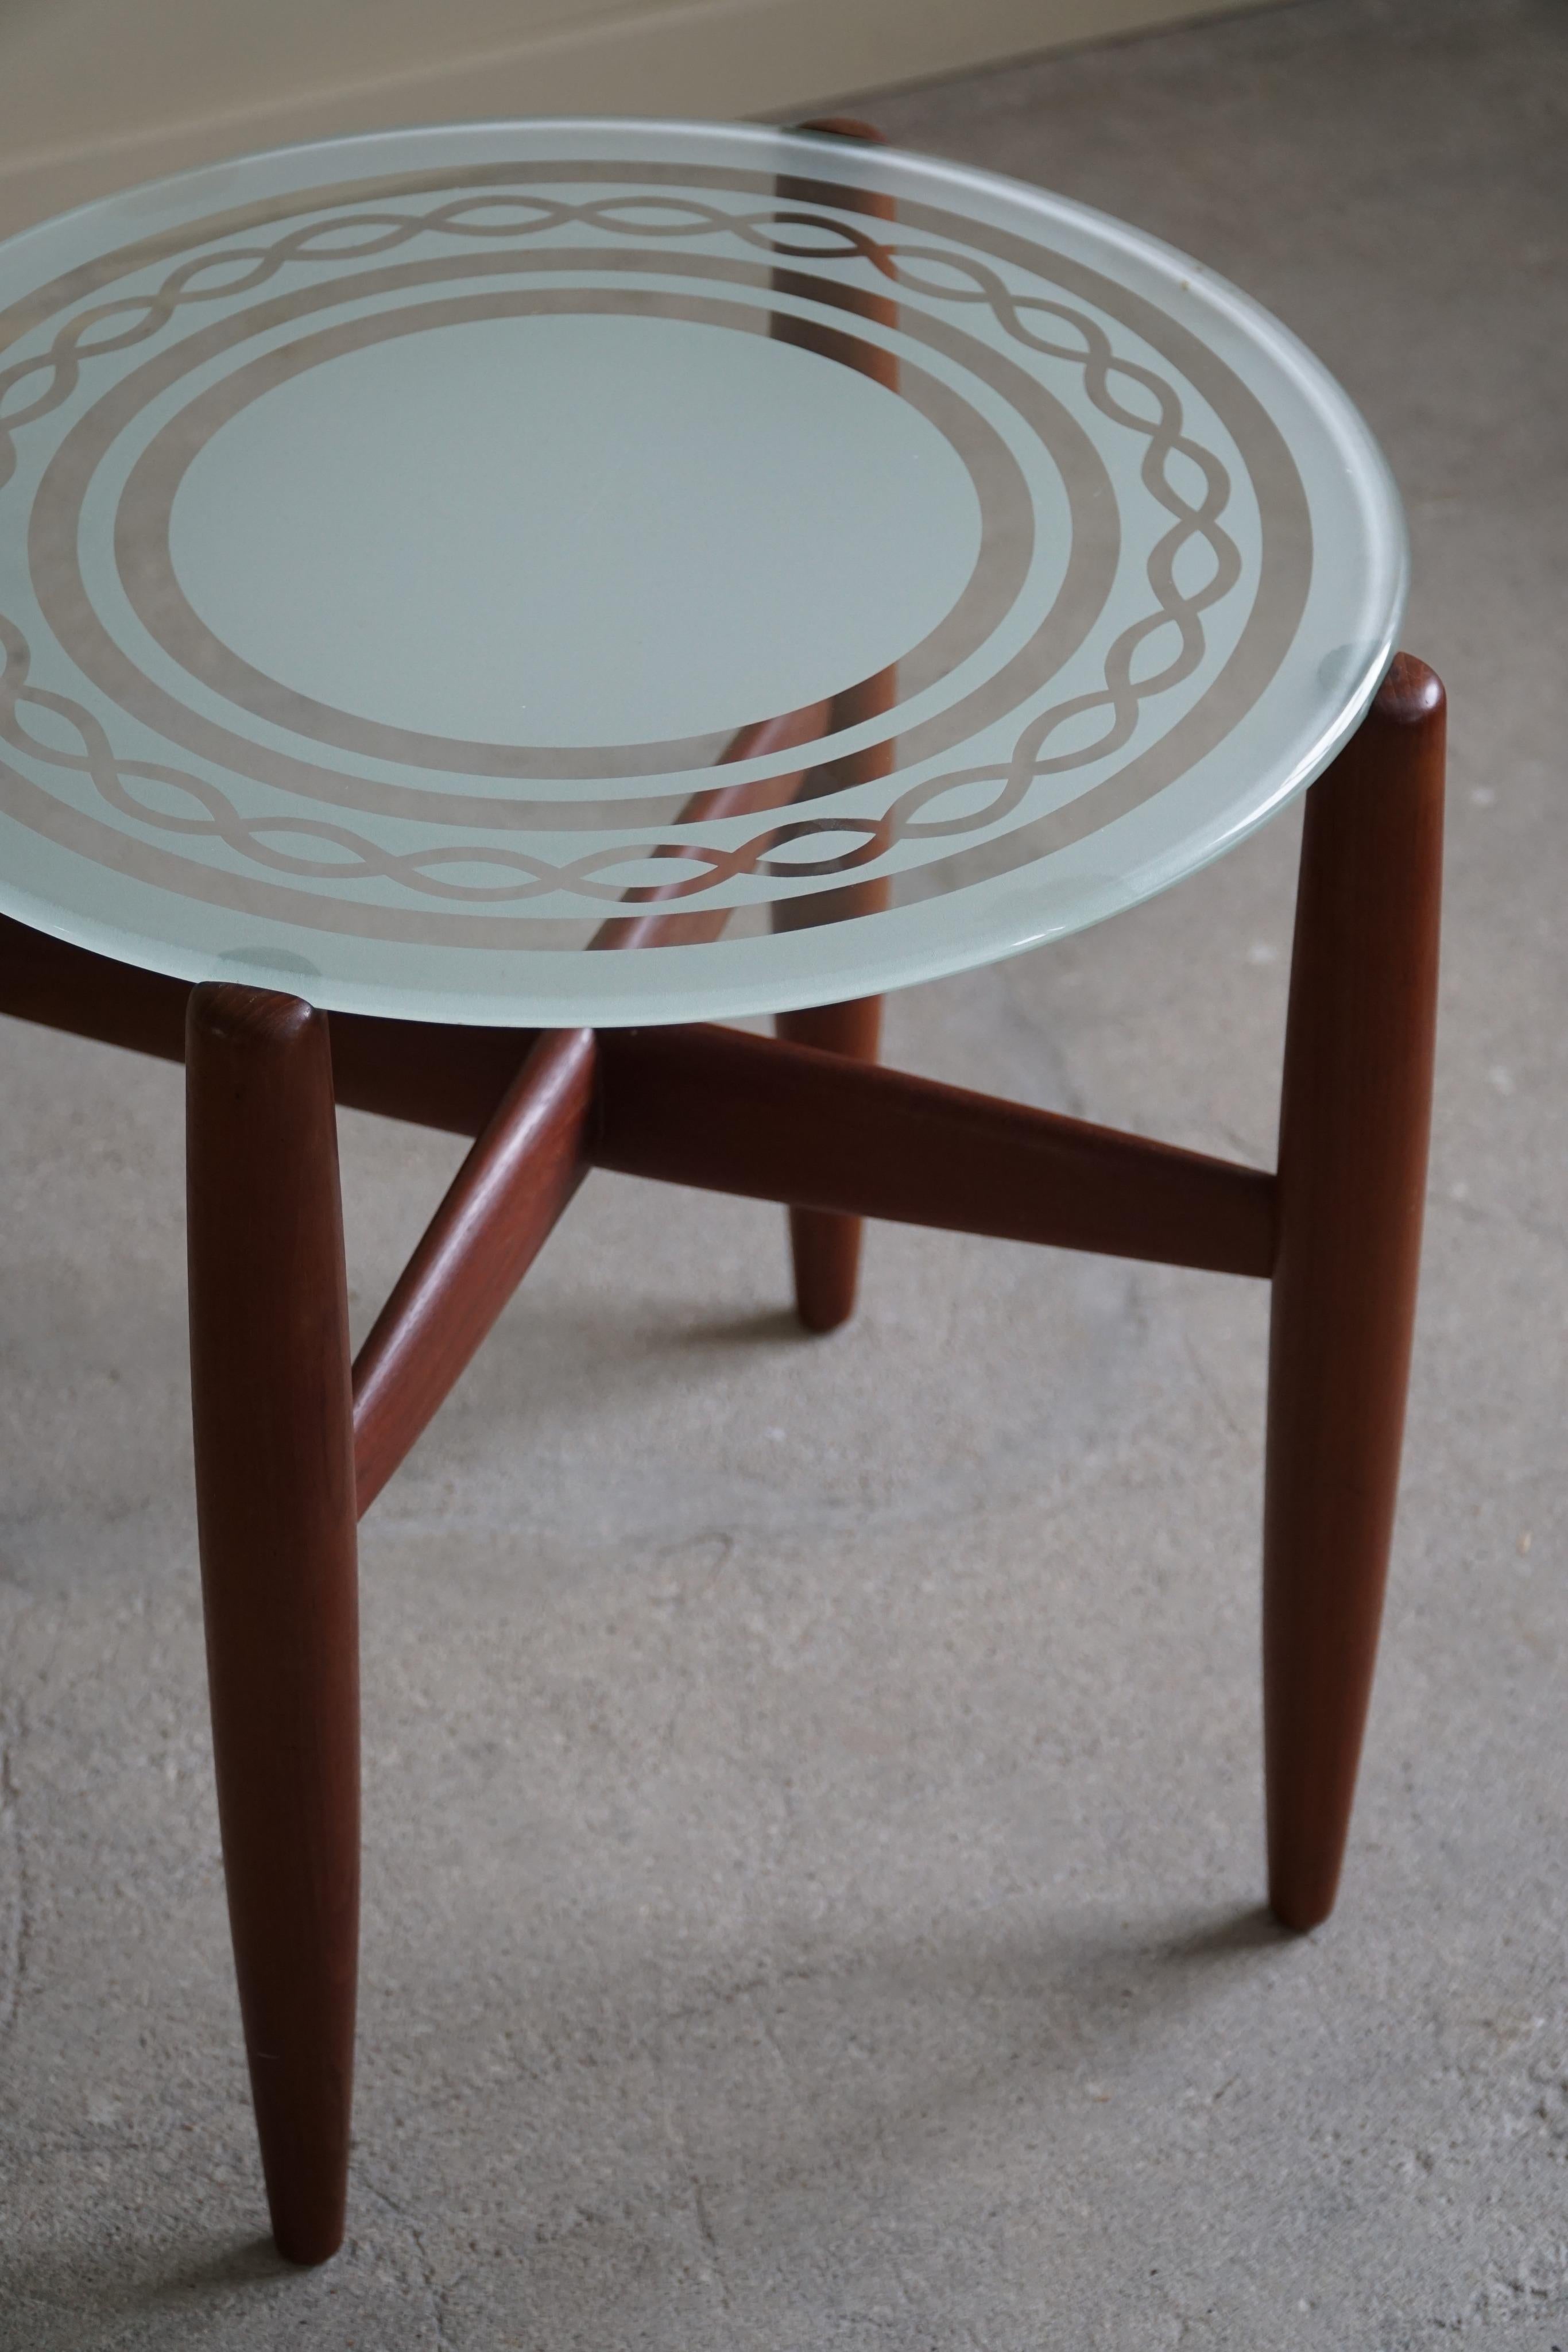 20th Century Side Table in Teak & Glass, Danish Mid Century Modern, Made in the 1960s For Sale